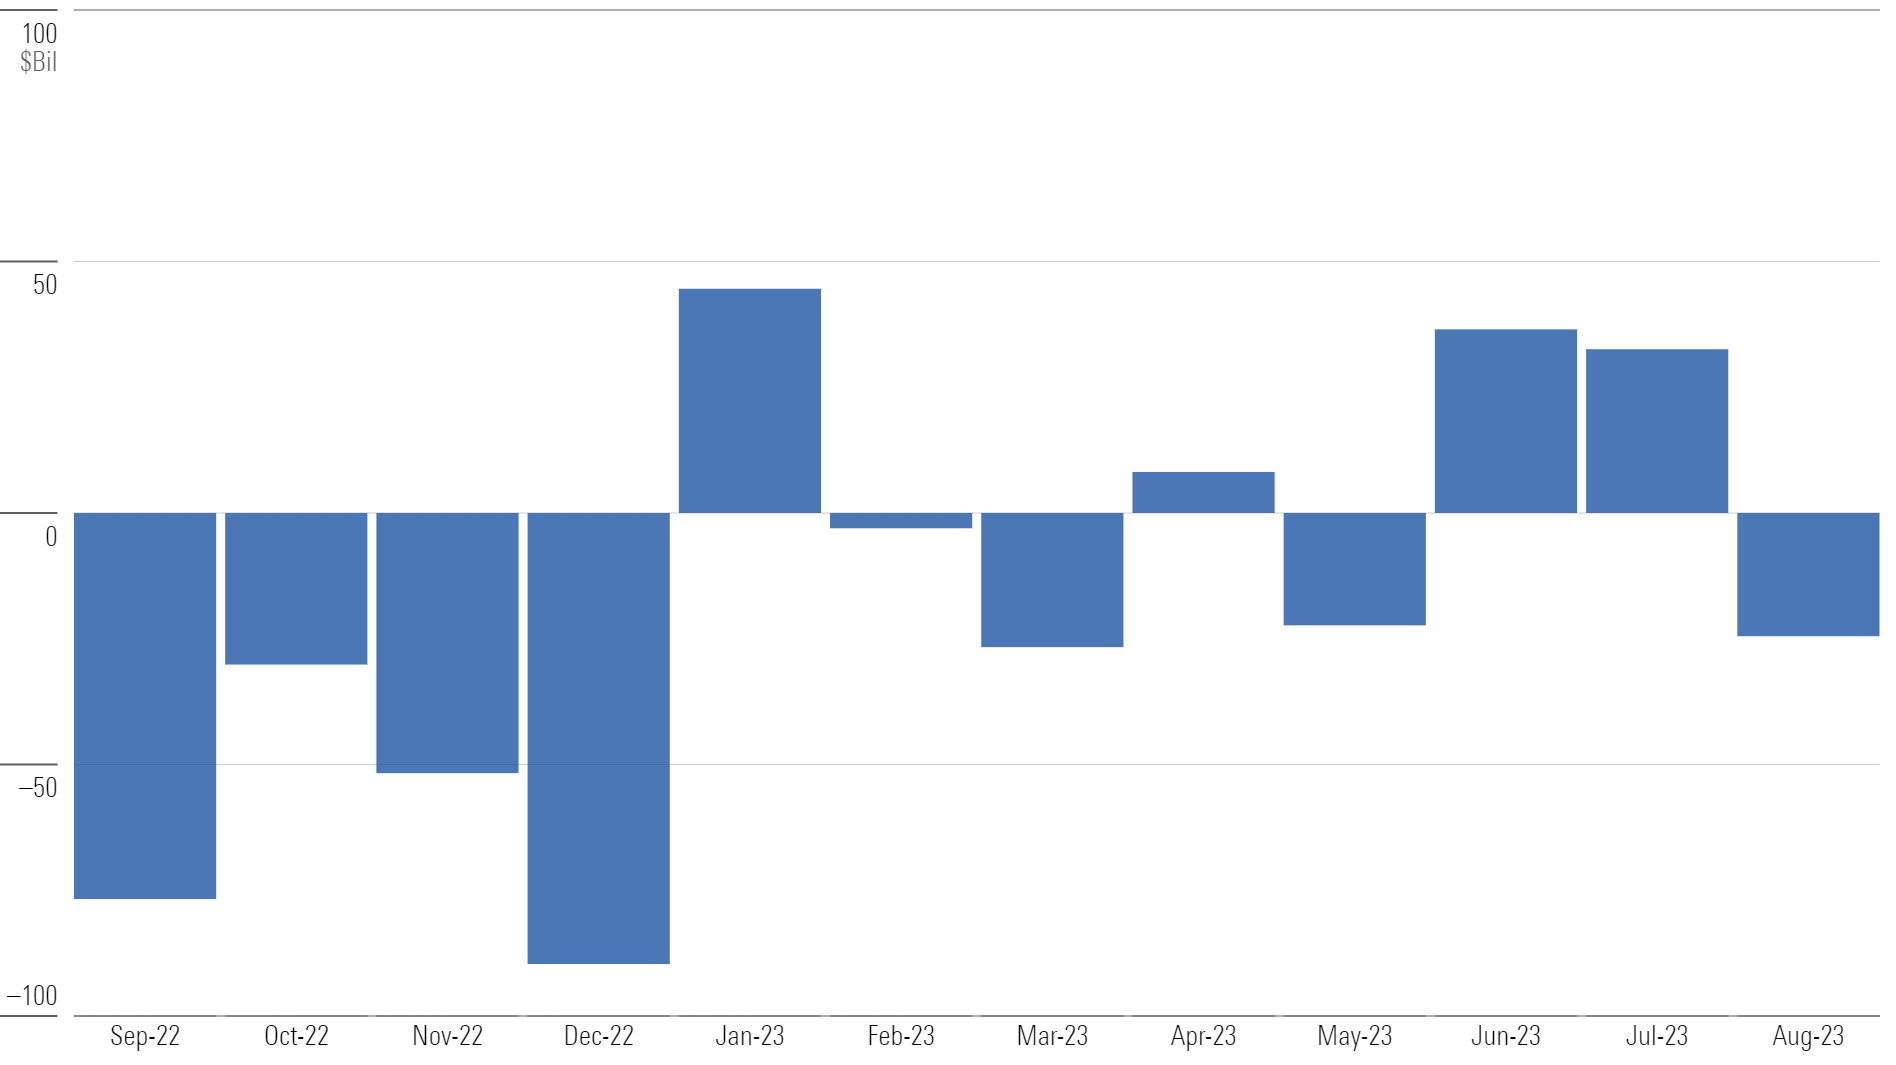 Bar chart of monthly flows for U.S. funds.